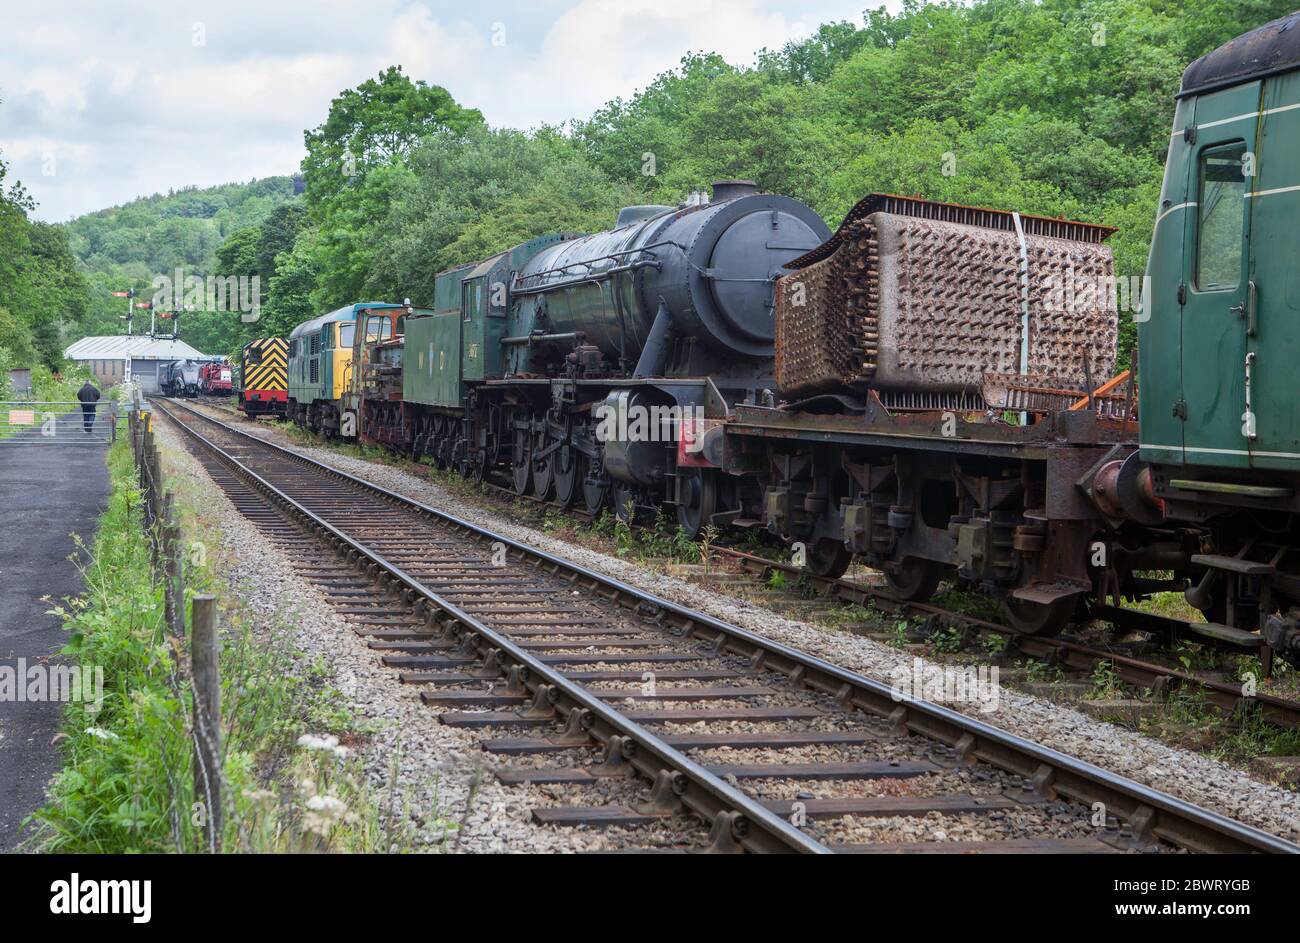 Storage siding with rolling stock awaiting repair and restoration on the North York Moors Railway near Grosmont, North Yorkshire Stock Photo